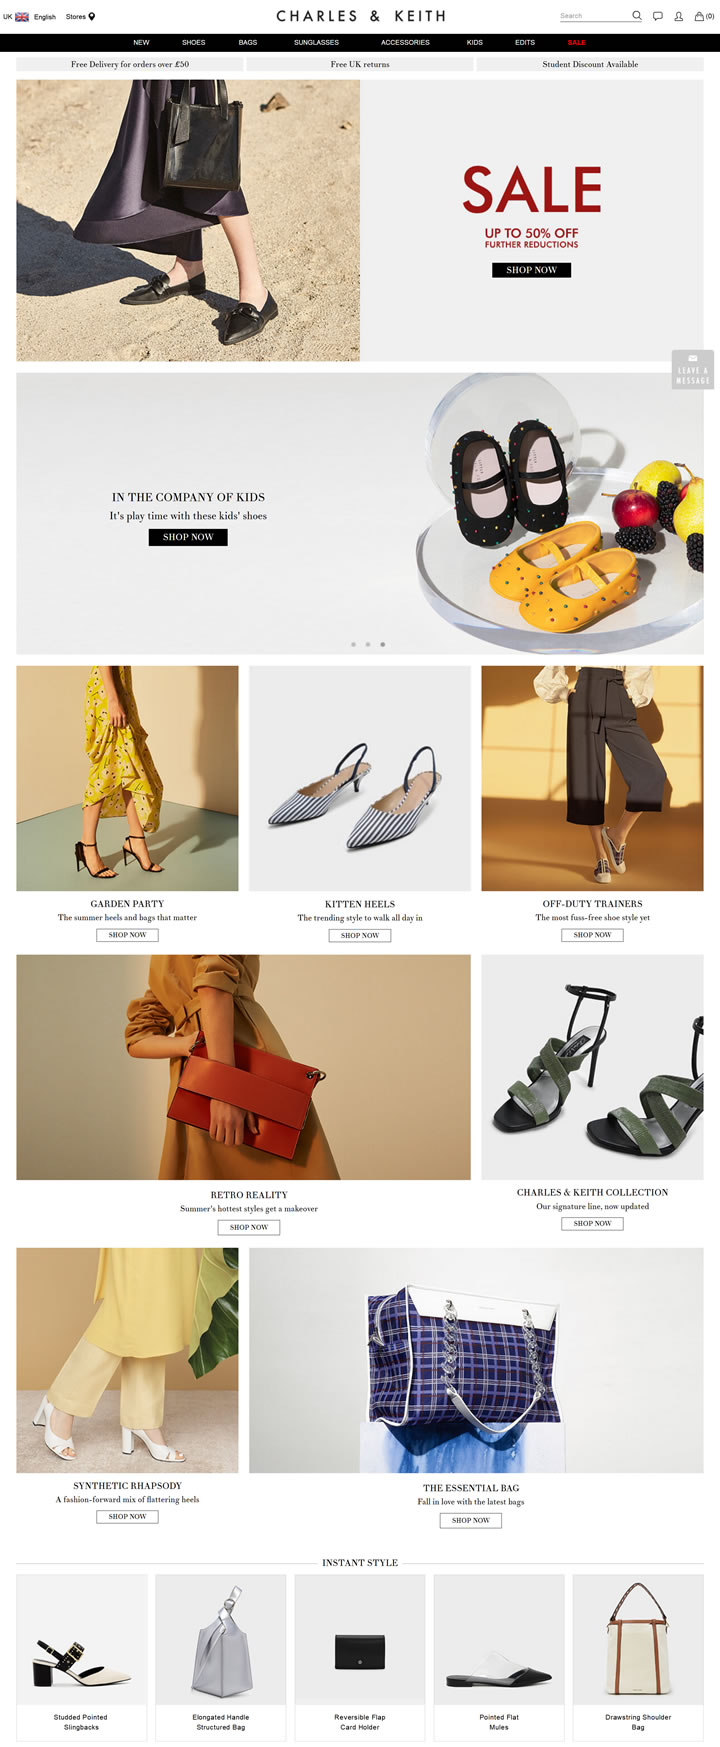 CHARLES & KEITH UK Official Site: Singapore Fashion Brand